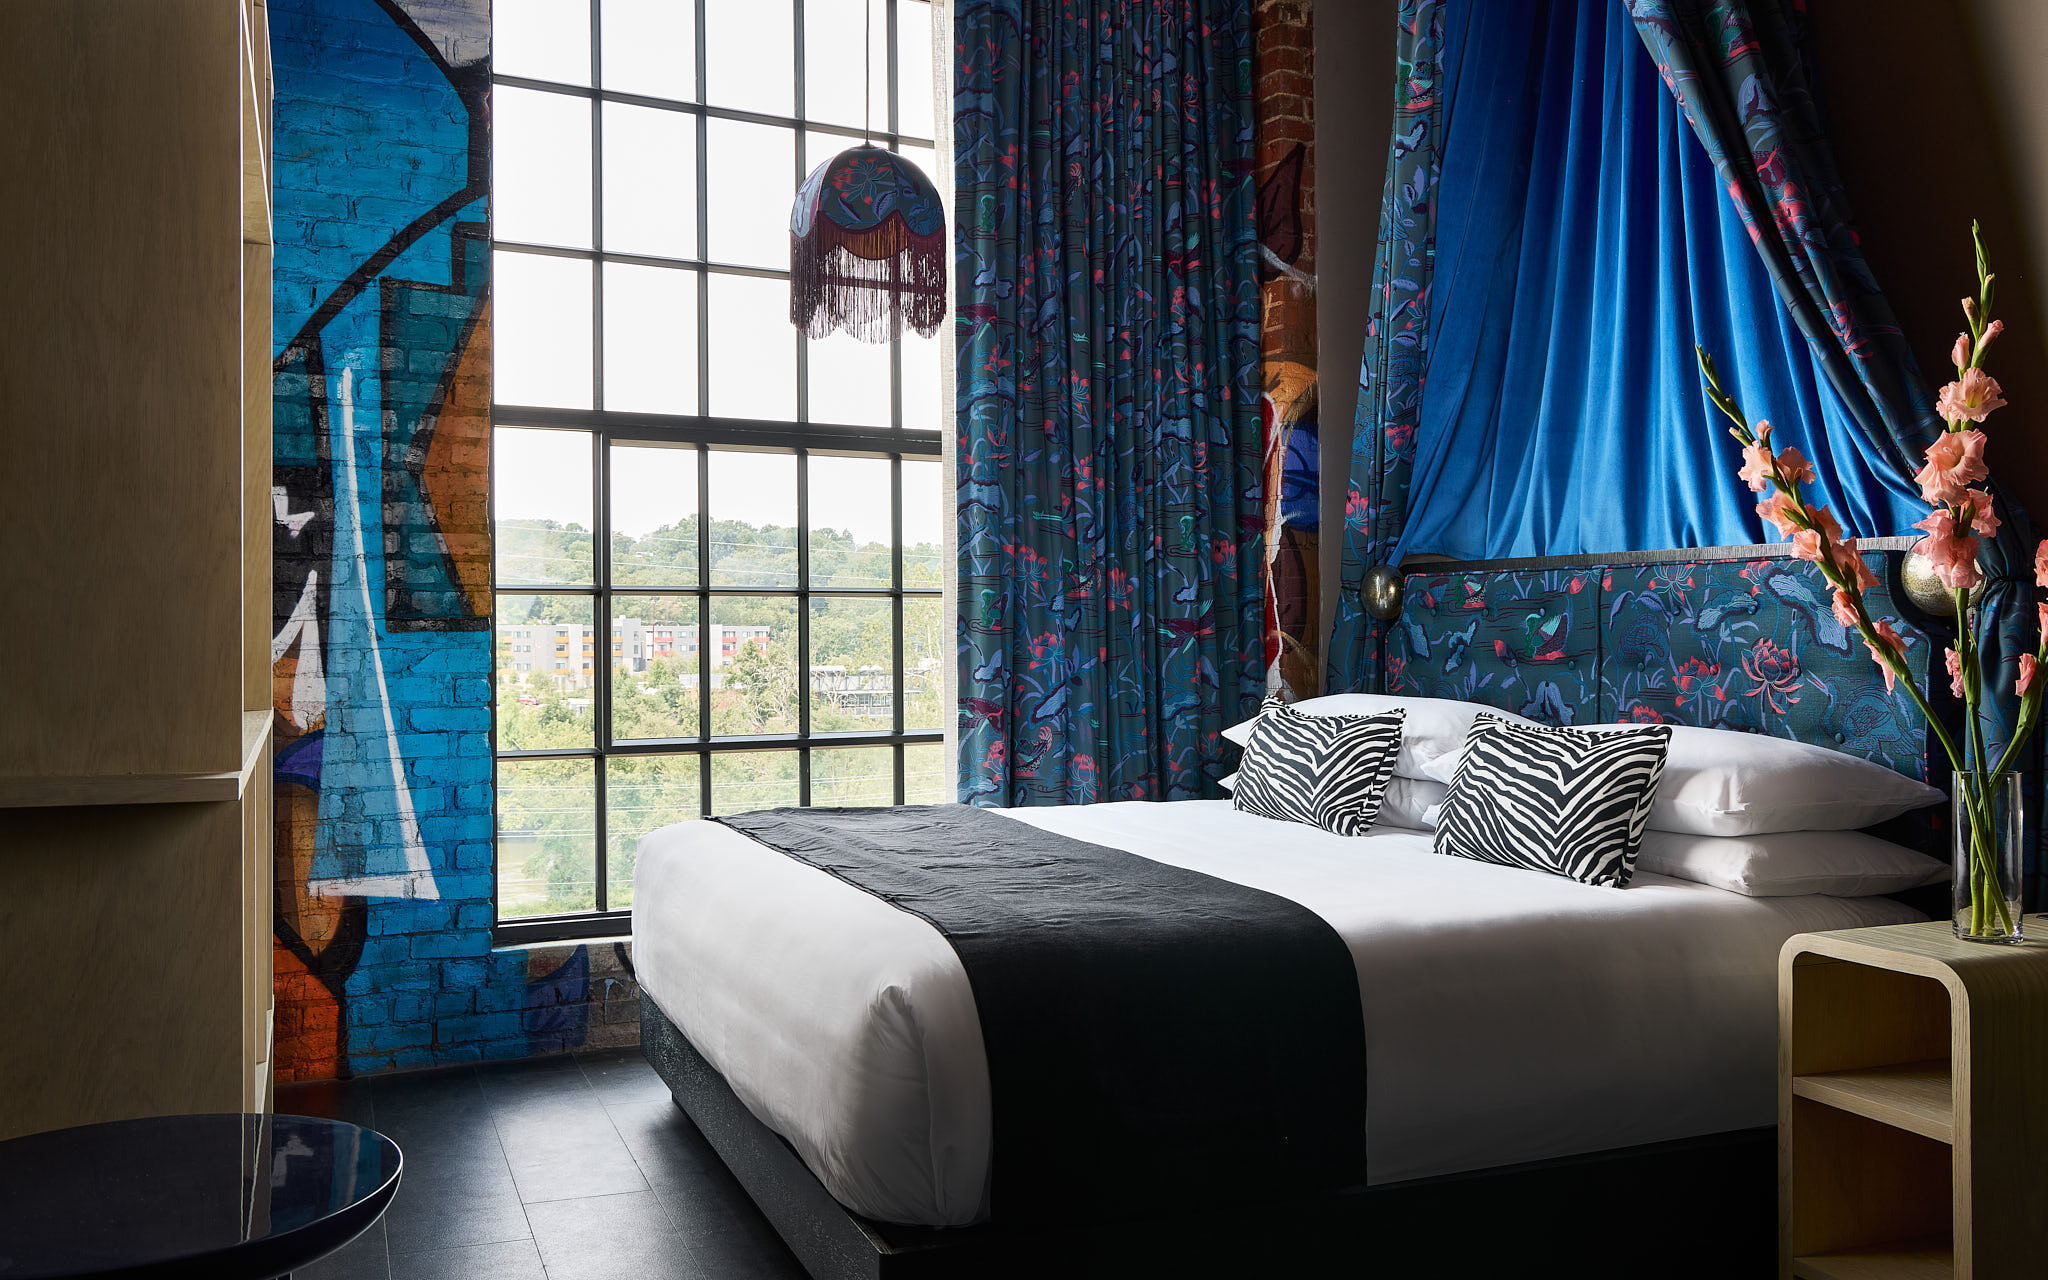 This Rad, New Boutique Hotel Channels the Creative Spirit of Asheville’s River Arts District